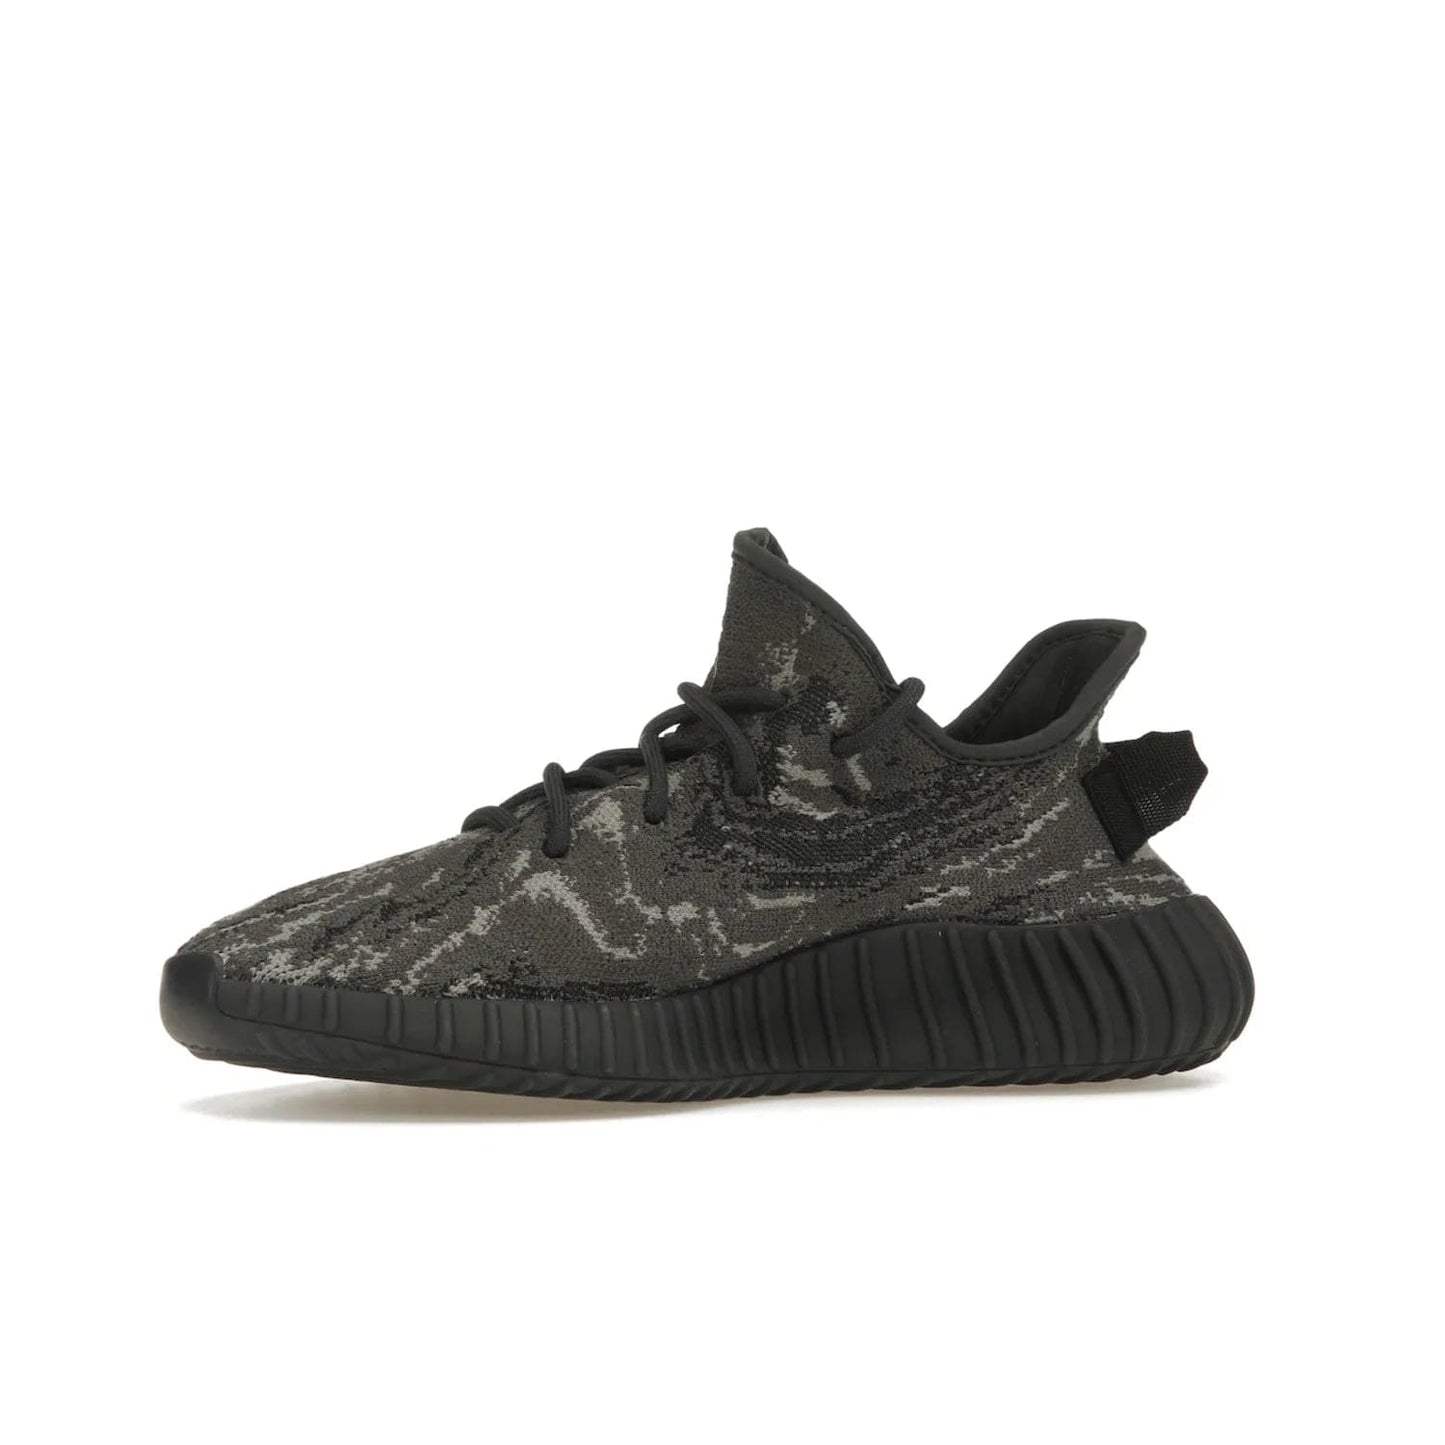 adidas Yeezy Boost 350 V2 MX Dark Salt - Image 17 - Only at www.BallersClubKickz.com - ##
The adidas Yeezy Boost 350 V2 MX Dark Salt offers a contemporary look with a signature combination of grey and black hues. Cushioned Boost midsole and side stripe allow for all day wear. Get the perfect fashion-forward addition with this sleek sneaker for $230.